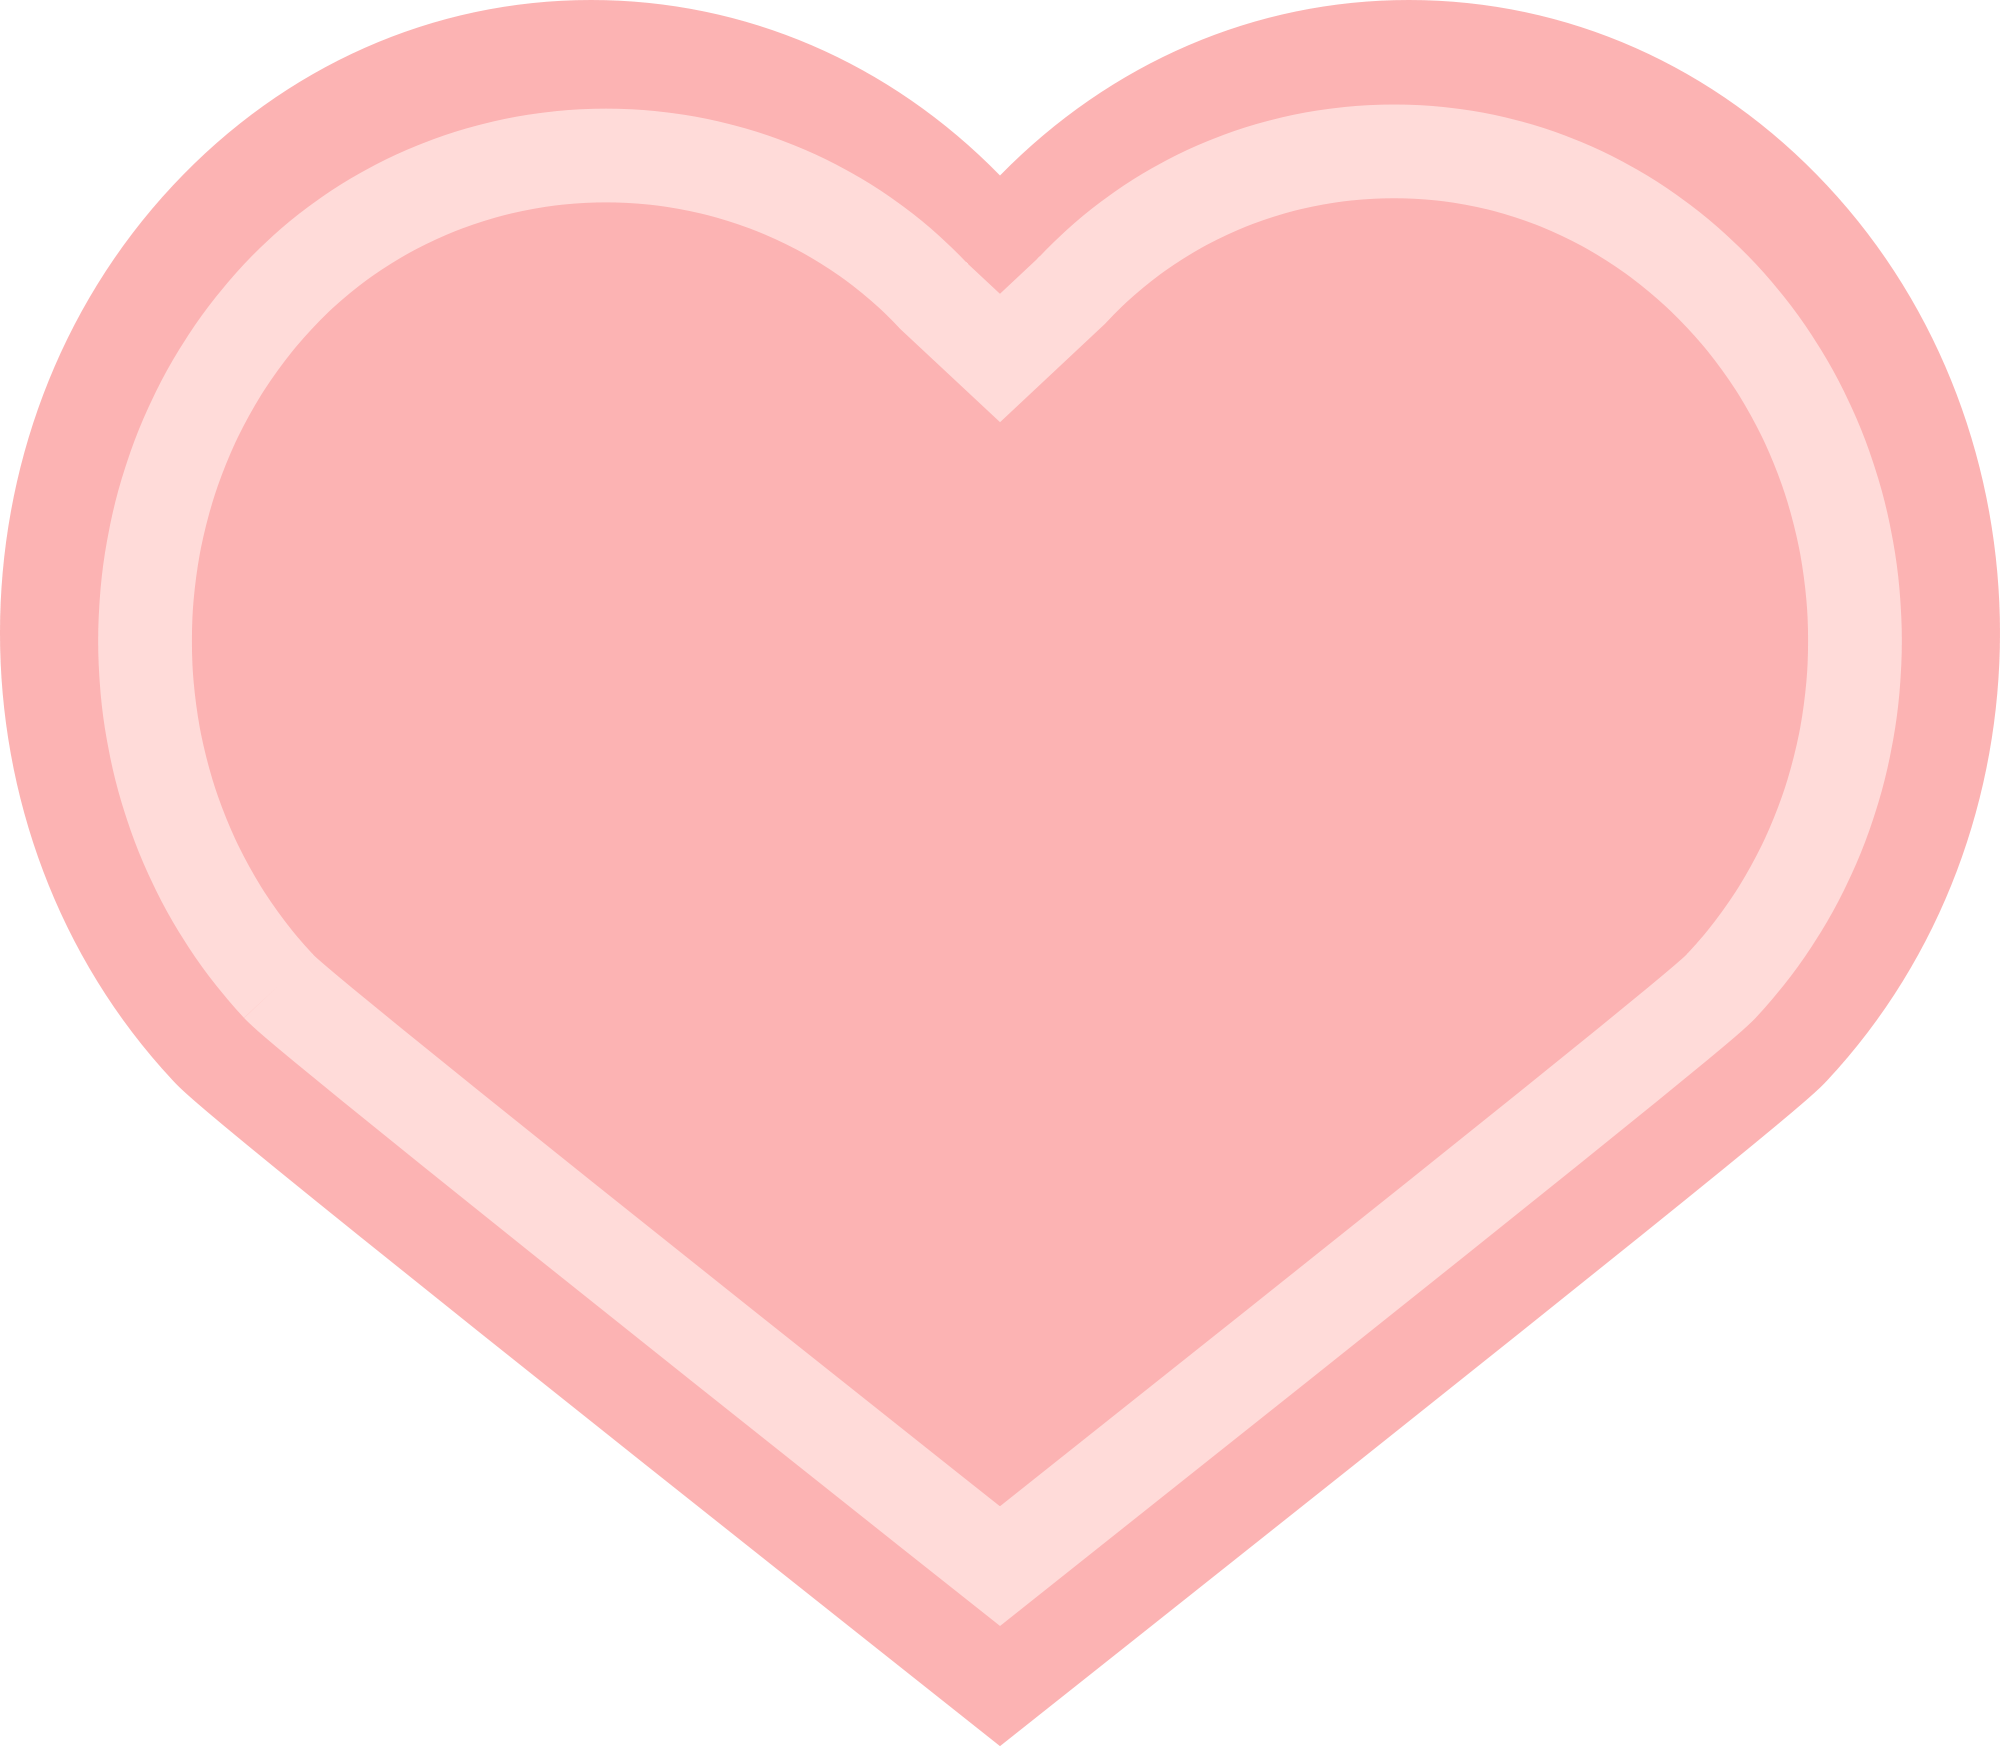 Free Pink Hearts Transparent, Download Free Pink Hearts Transparent png